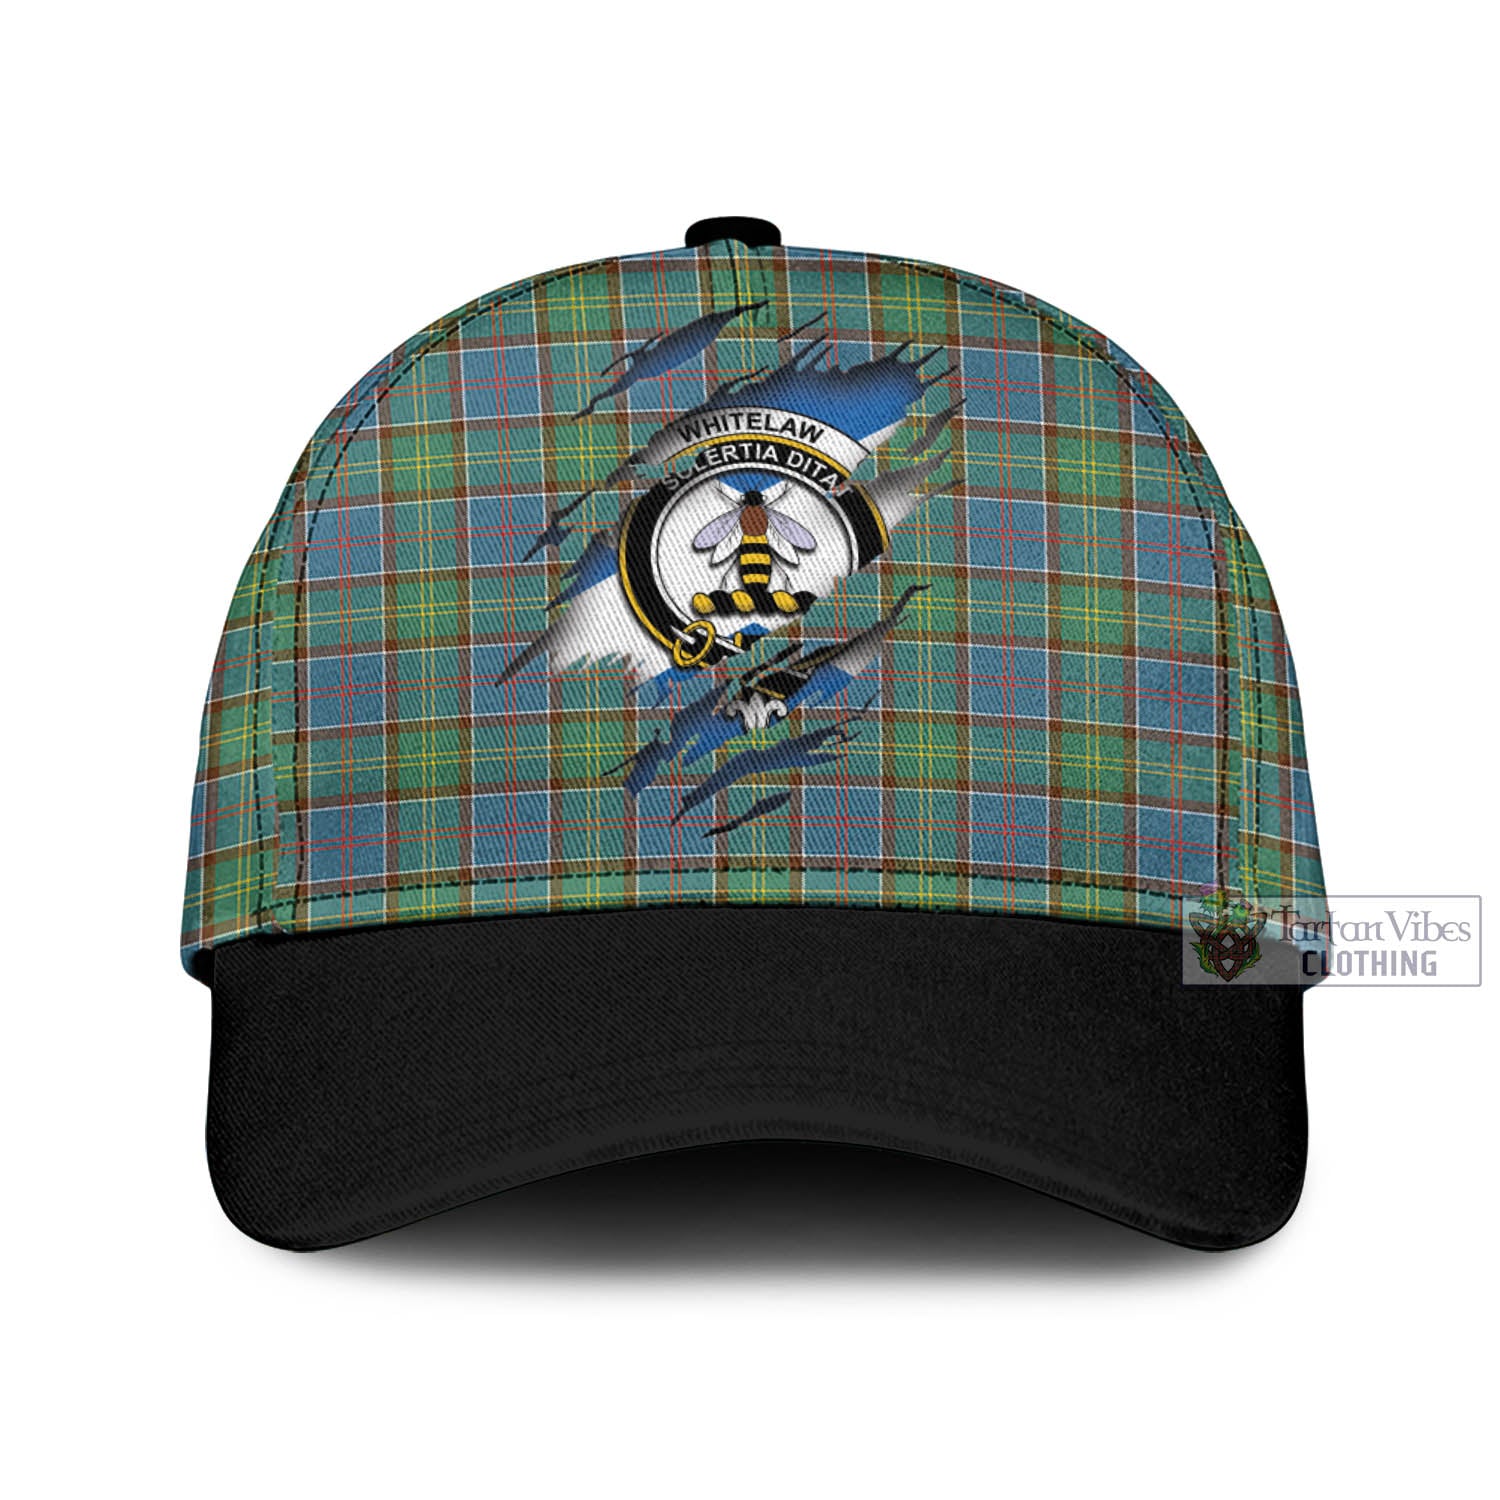 Tartan Vibes Clothing Whitelaw Tartan Classic Cap with Family Crest In Me Style